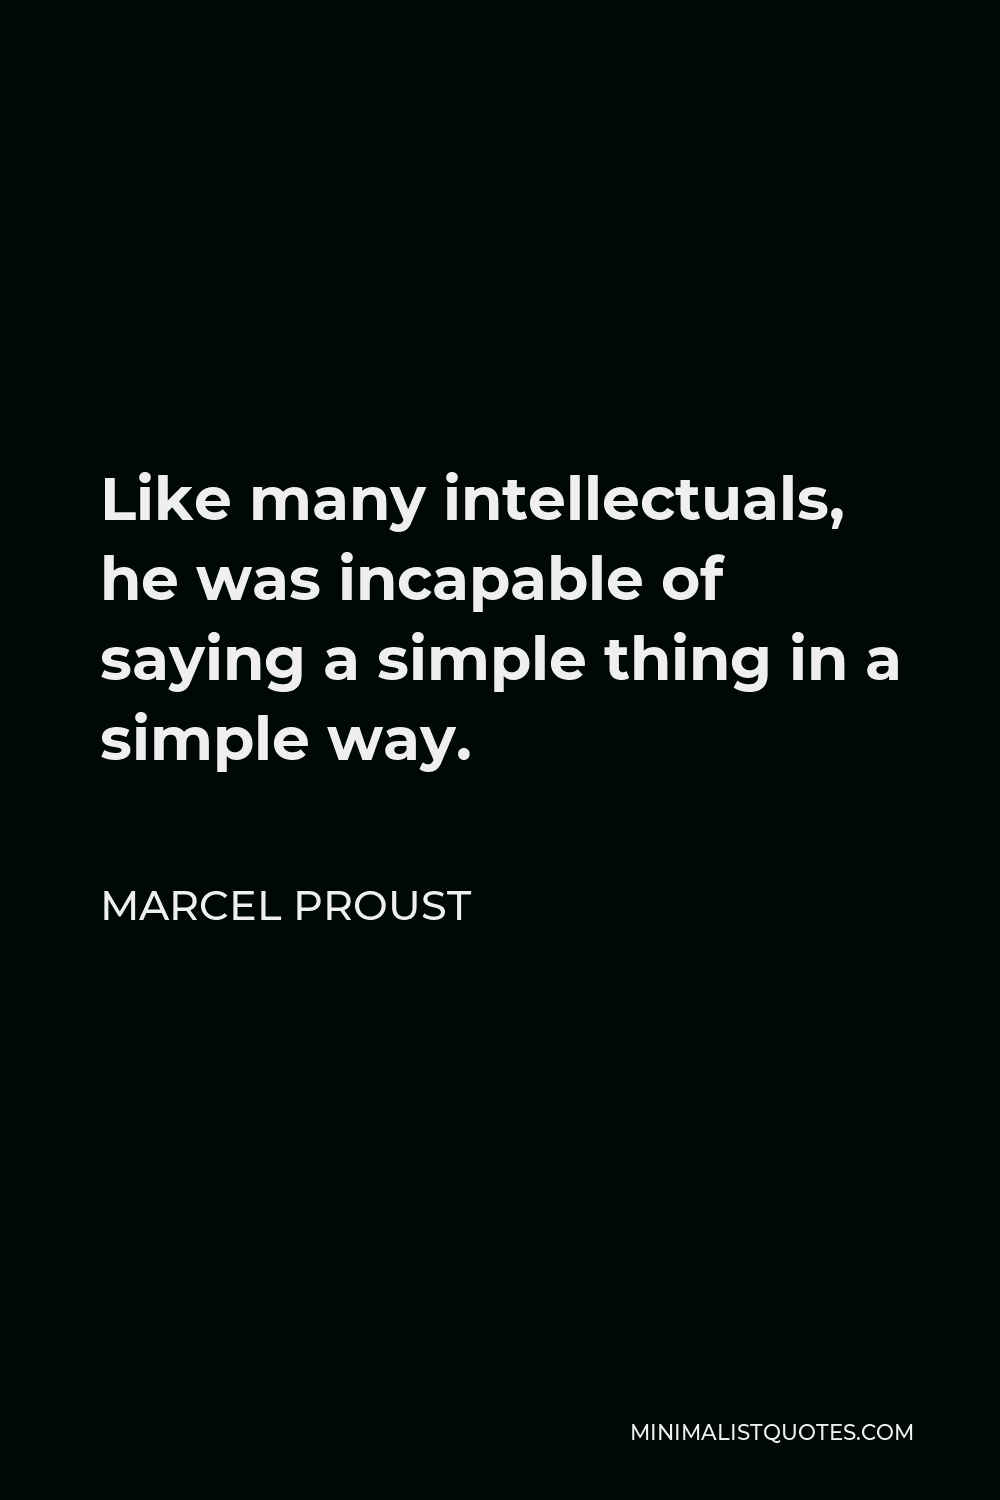 Marcel Proust Quote - Like many intellectuals, he was incapable of saying a simple thing in a simple way.